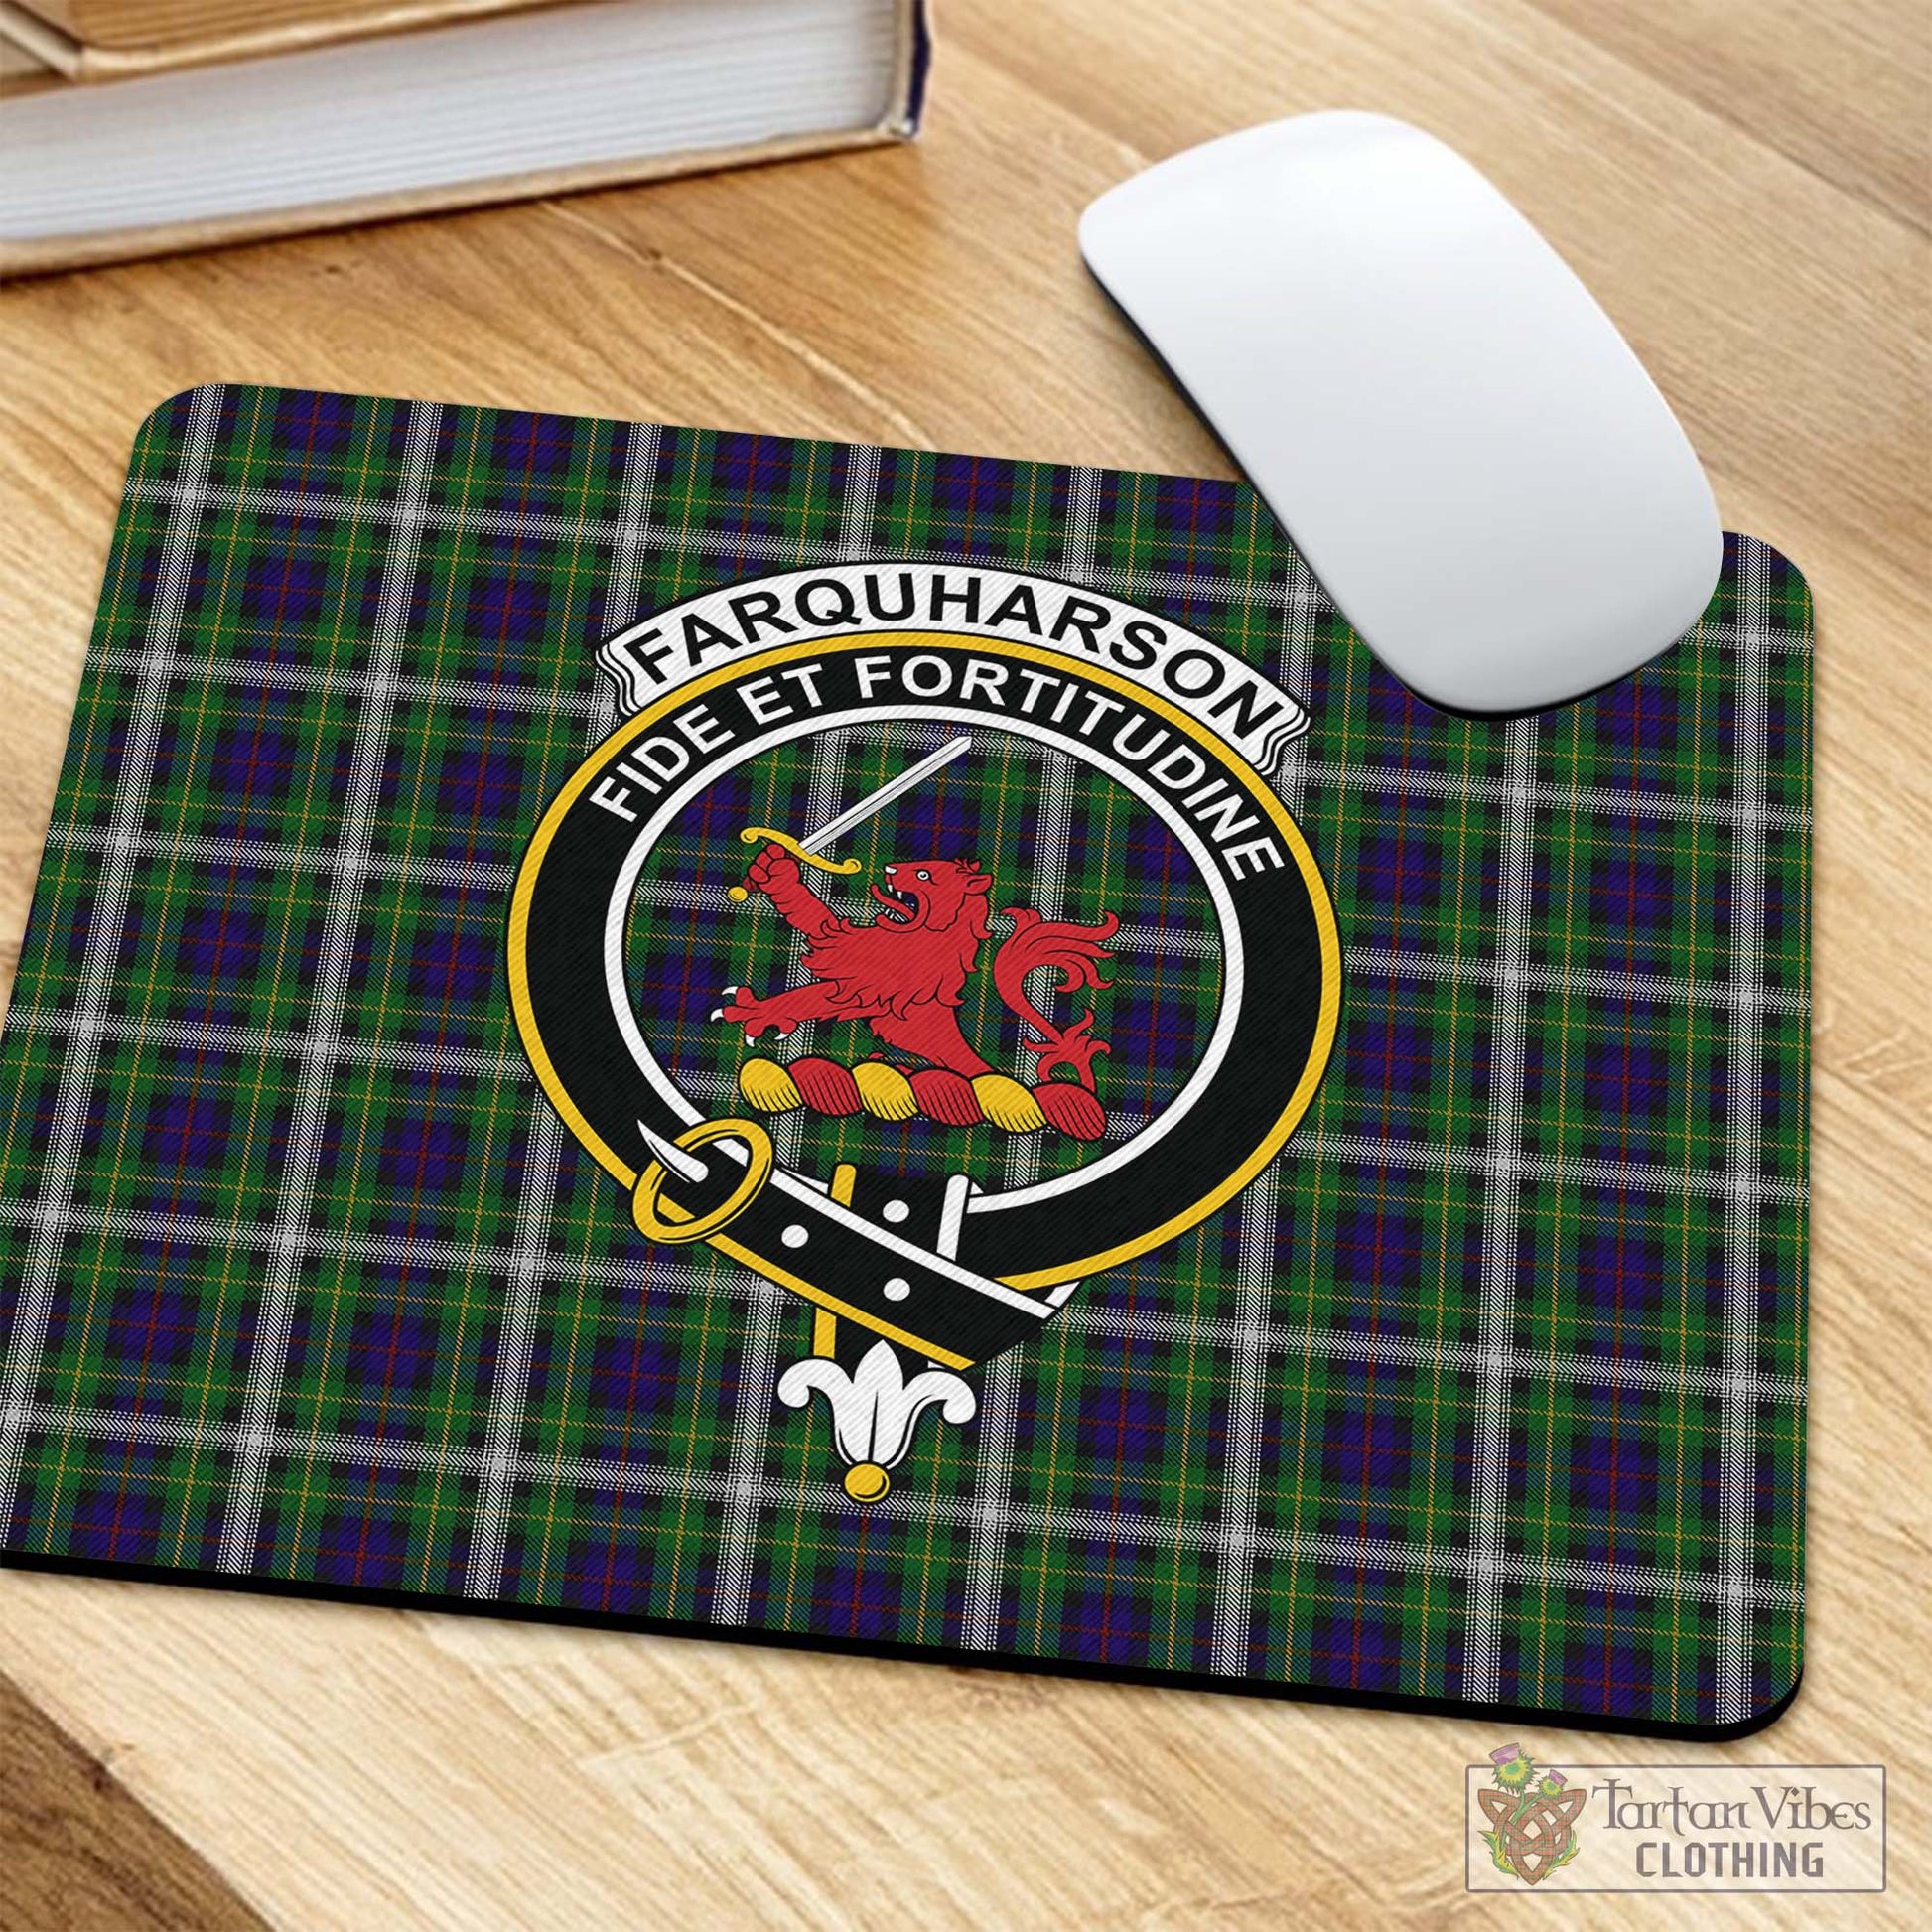 Tartan Vibes Clothing Farquharson Dress Tartan Mouse Pad with Family Crest